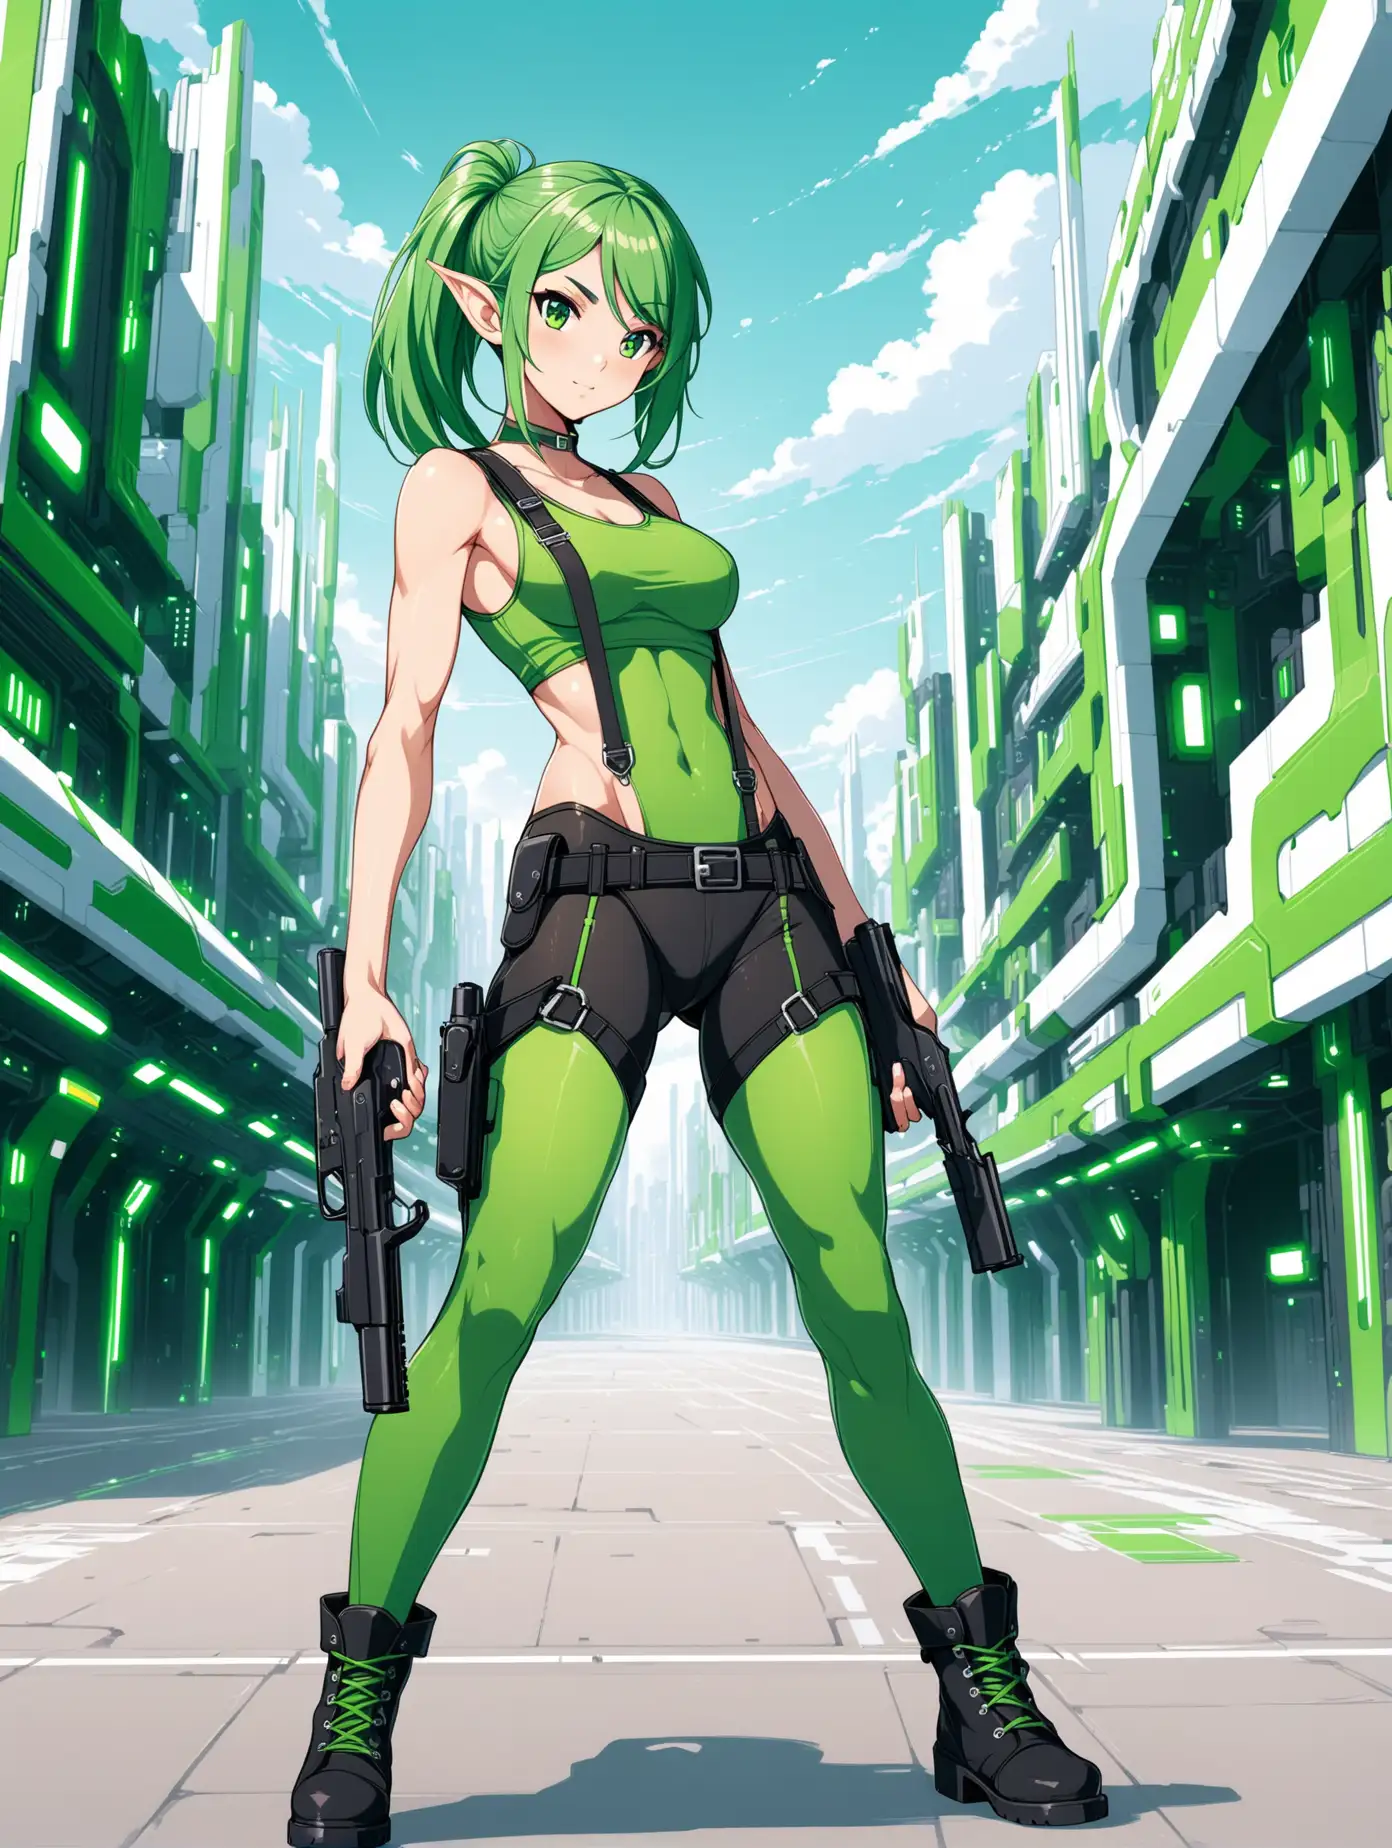 sexy fit 24 year old hero girl, side shave green hair, green eyes, elf ears, posing with handguns in futuristic town, super skinny toned body, short green tank top, sexy midriff, wearing suspenders, green tights, holsters on each thigh, combat boots, green black white 3 color minimal design